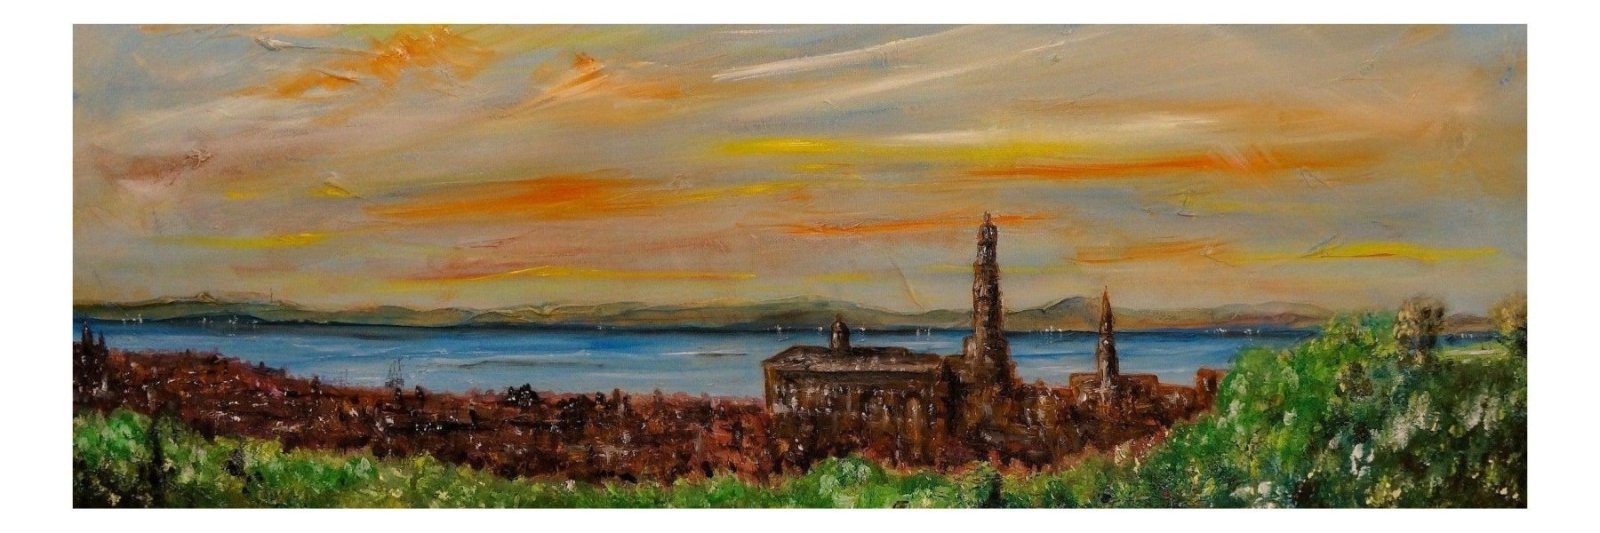 Greenock-Panoramic Prints-River Clyde Art Gallery-Paintings, Prints, Homeware, Art Gifts From Scotland By Scottish Artist Kevin Hunter